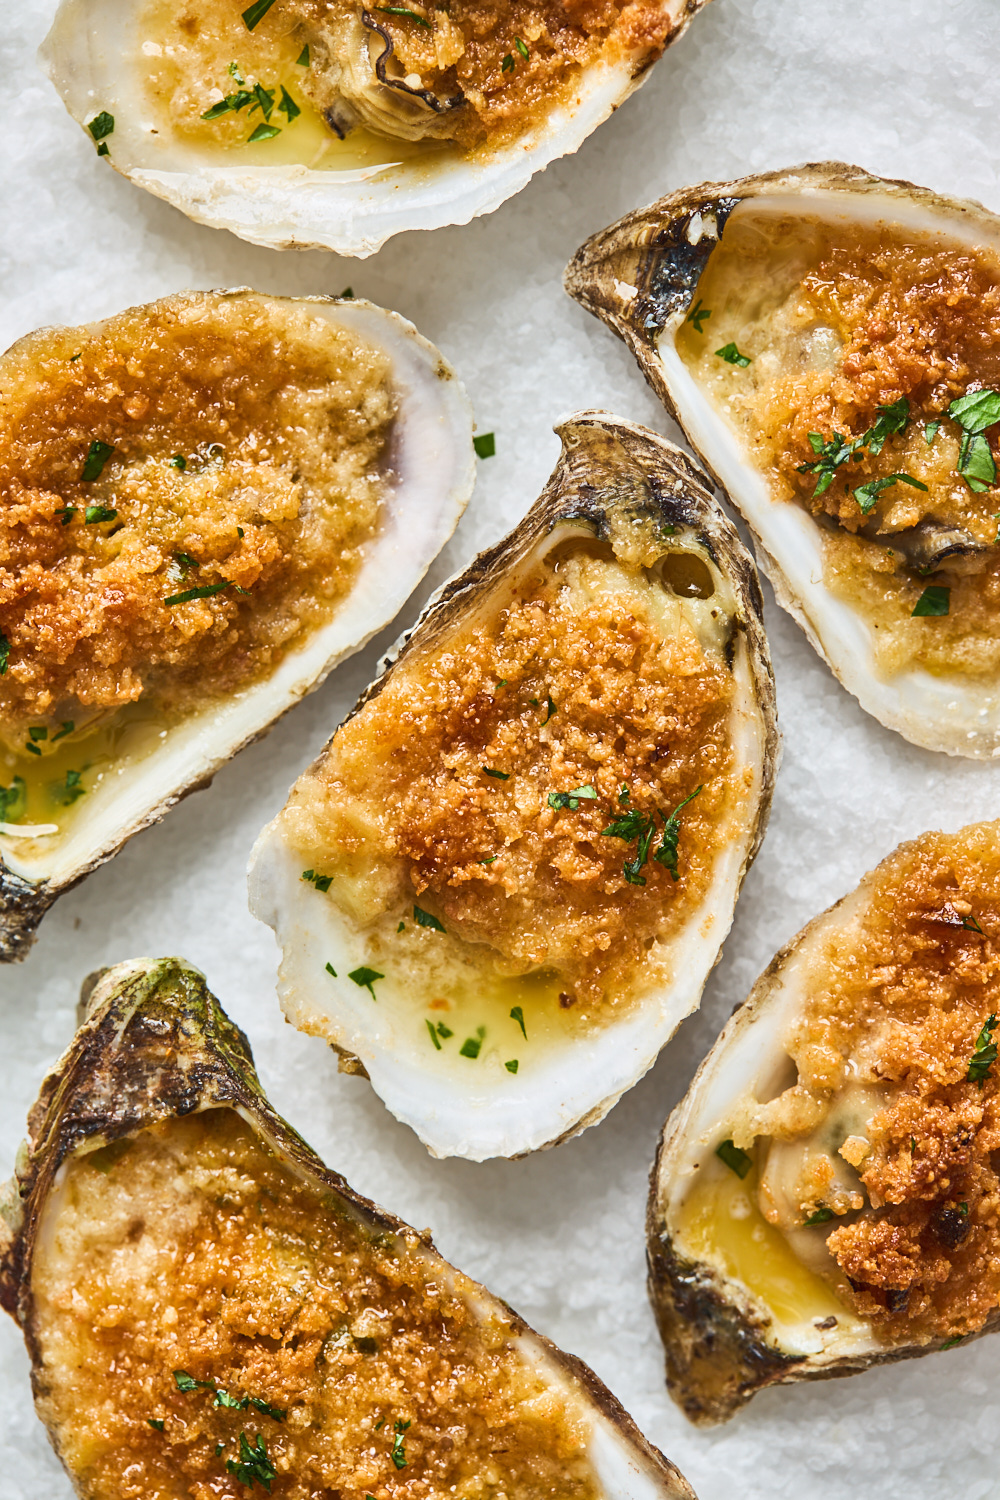 https://www.oliveandmango.com/images/uploads/2021_08_04_spicy_butter_and_herb_baked_oysters_2.jpg